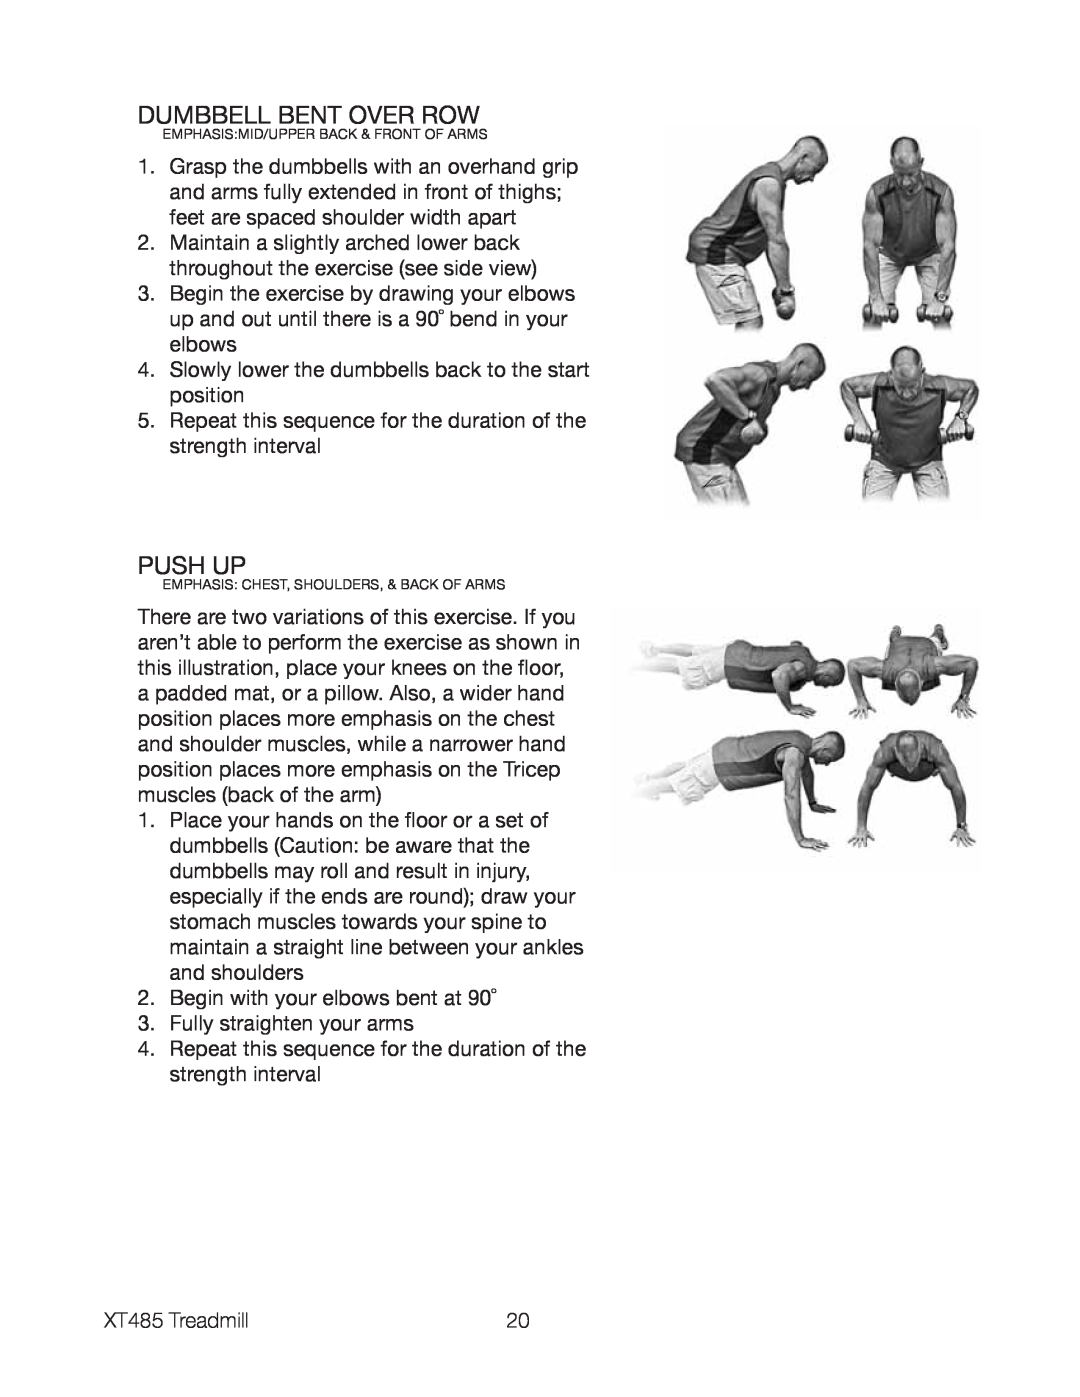 Spirit XT485 owner manual Dumbbell Bent Over Row, Push Up, Emphasismid/Upper Back & Front Of Arms 